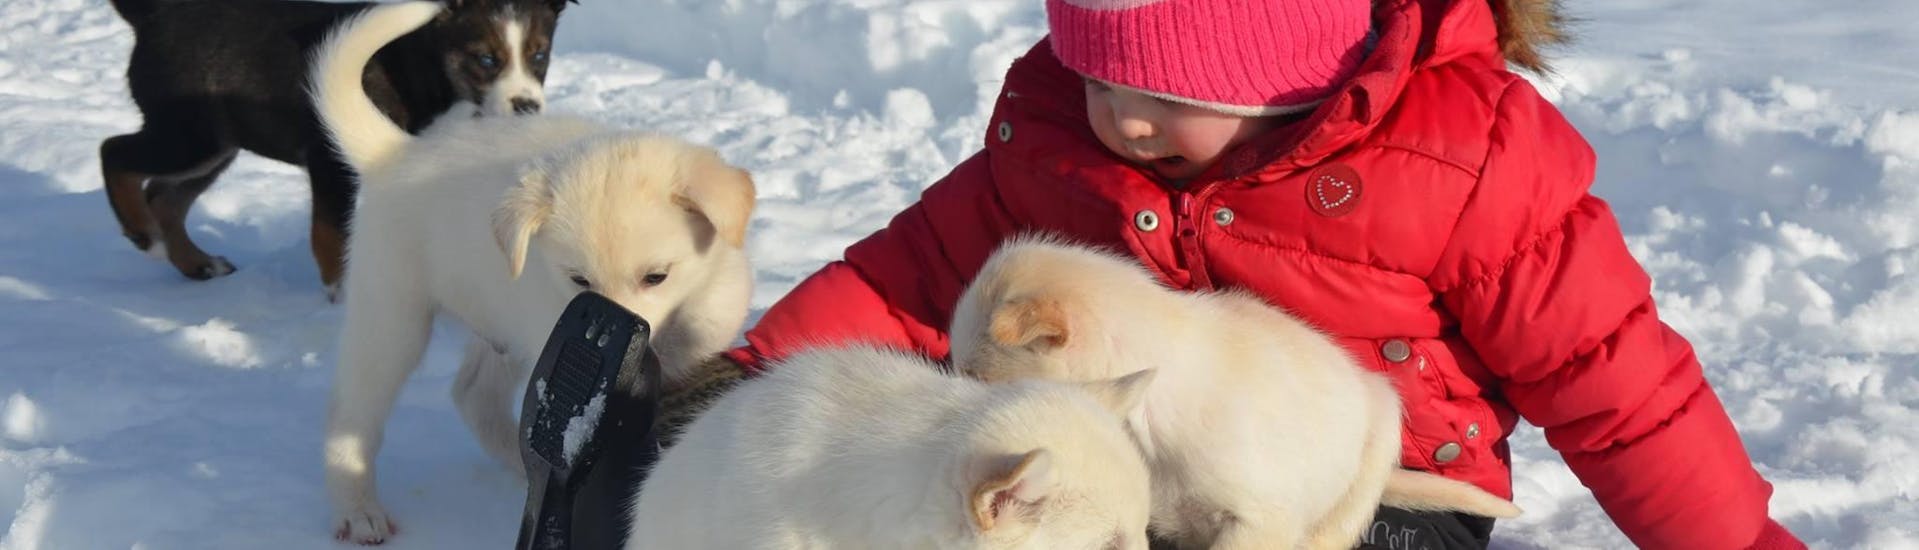 A little girl is playing in the snow with puppies during Husky Kennel Visit in Kopperå at Norway Husky Adventure.